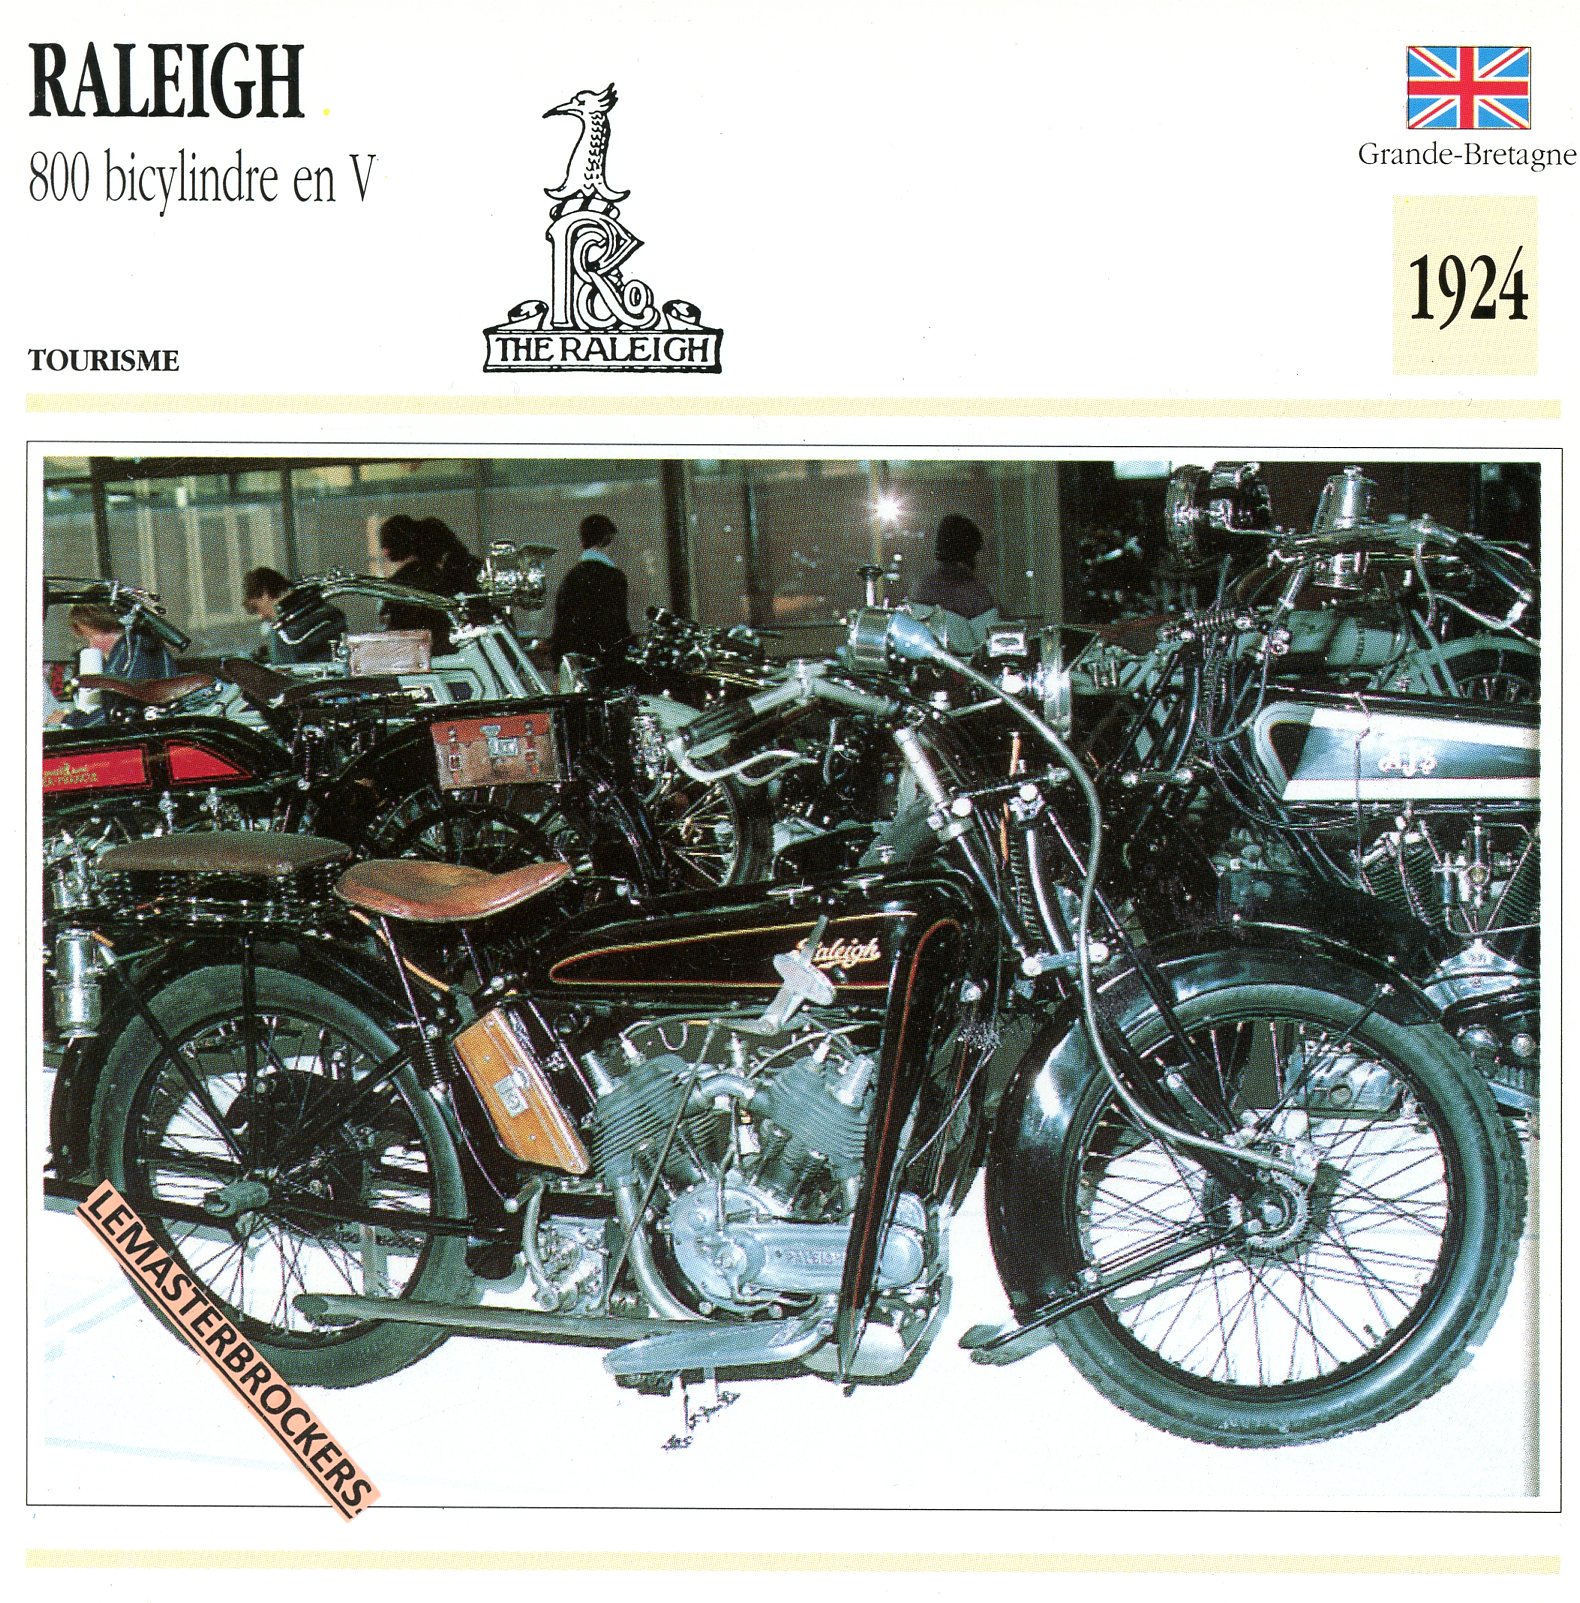 RALEIGH-800-BICYLINDRE-V-1924-FICHE-MOTO-ATLAS-lemasterbrockers-CARD-MOTORCYCLE